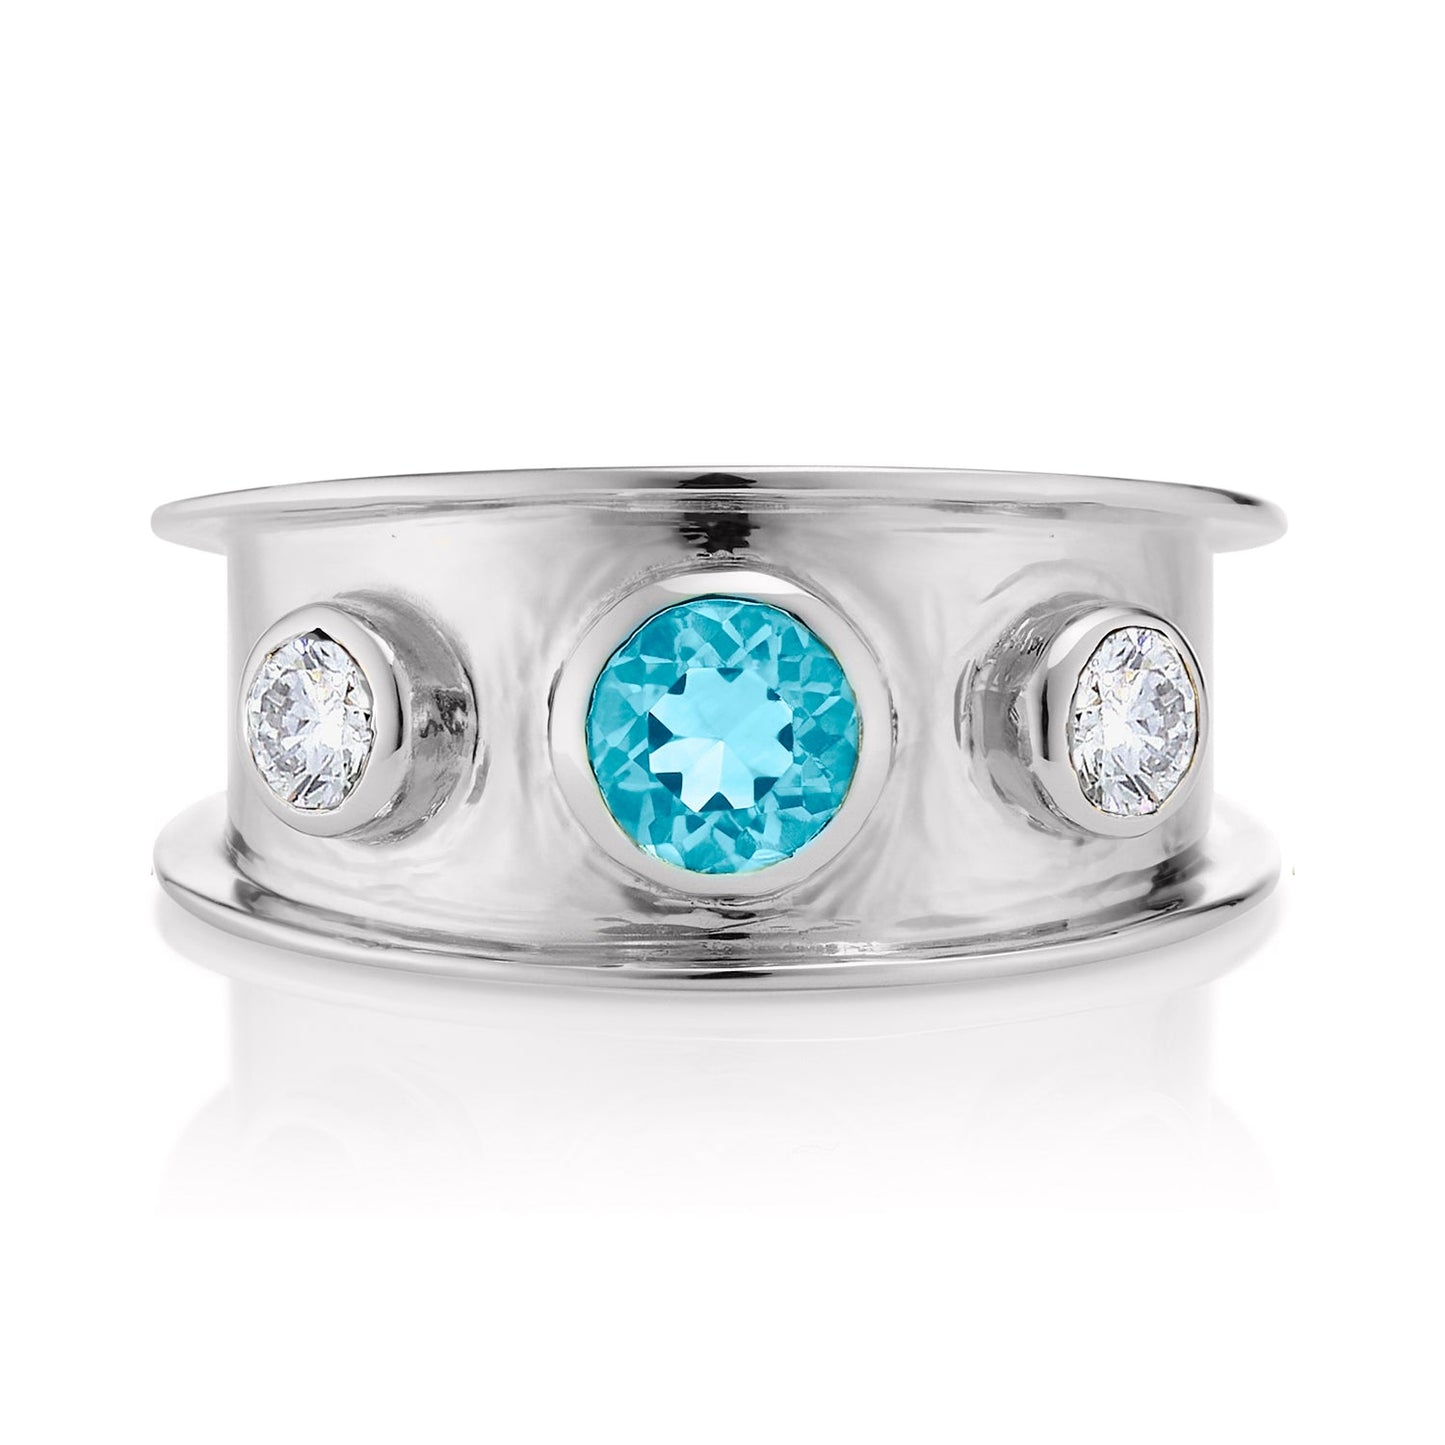 London-made luxury custom gold gemstone jewellery -9ct White Gold Statement Ring in Blue Topaz and White Topaz – Andalusian Collection, Augustine Jewellery, British Jewellers, Gemstone Jewellery, Luxury Jewellery London.